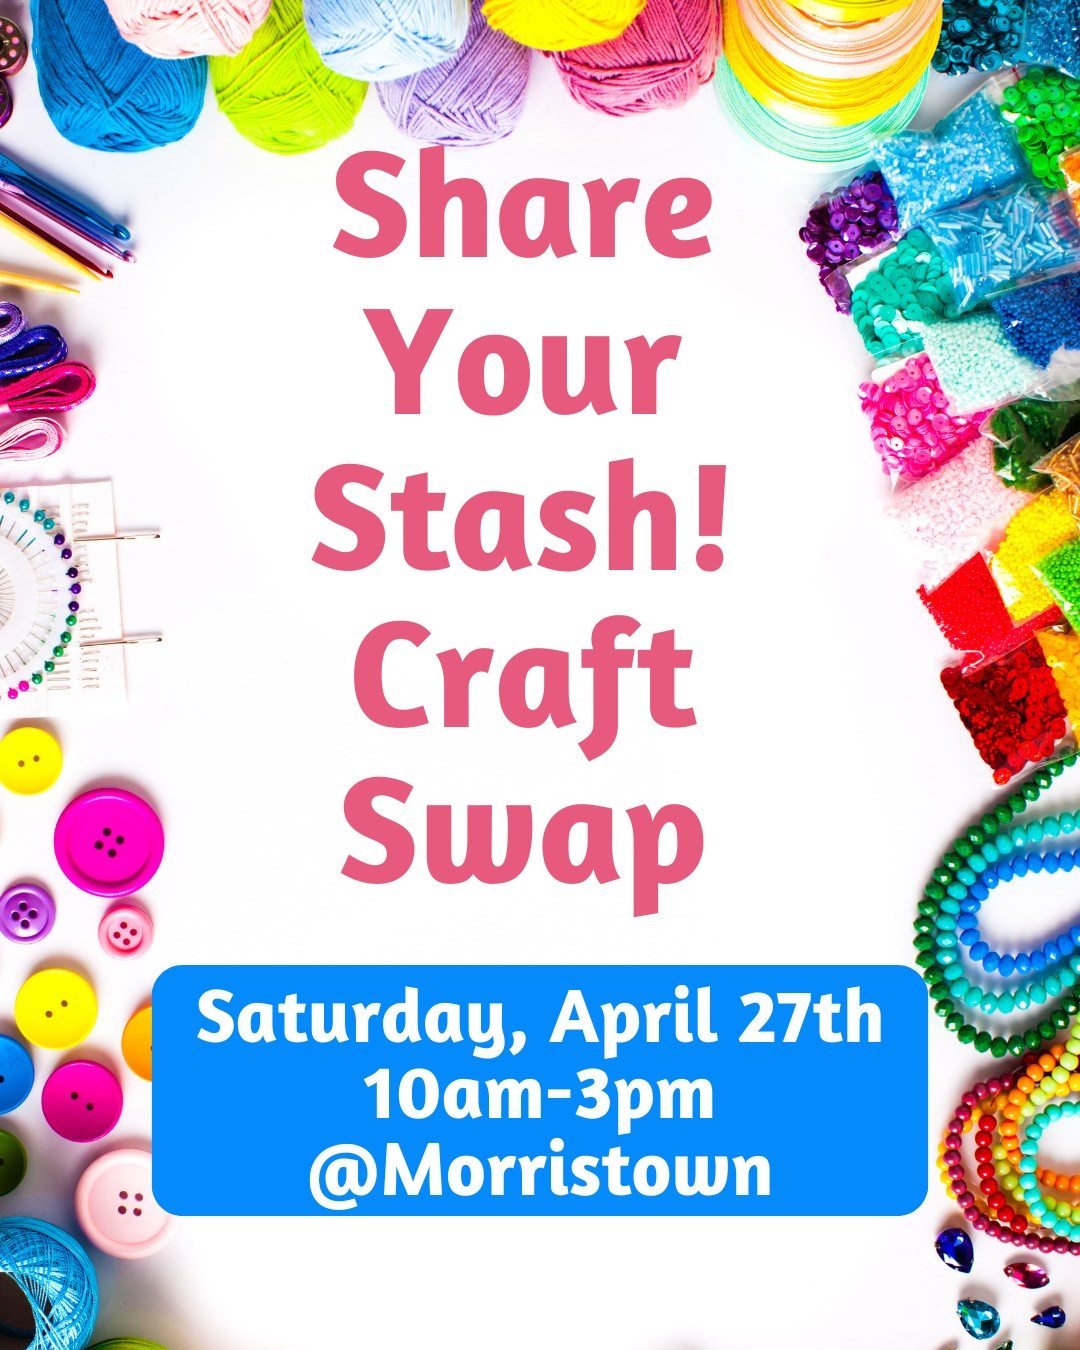 Saturday April 27th.  Velma Wortman Morristown Branch - Shelby County Public Library  @morristownlibrary  Invites you to clean out your craft supplies and bring enough to share! Tables will be set up to provide browsing space of all the shared materi